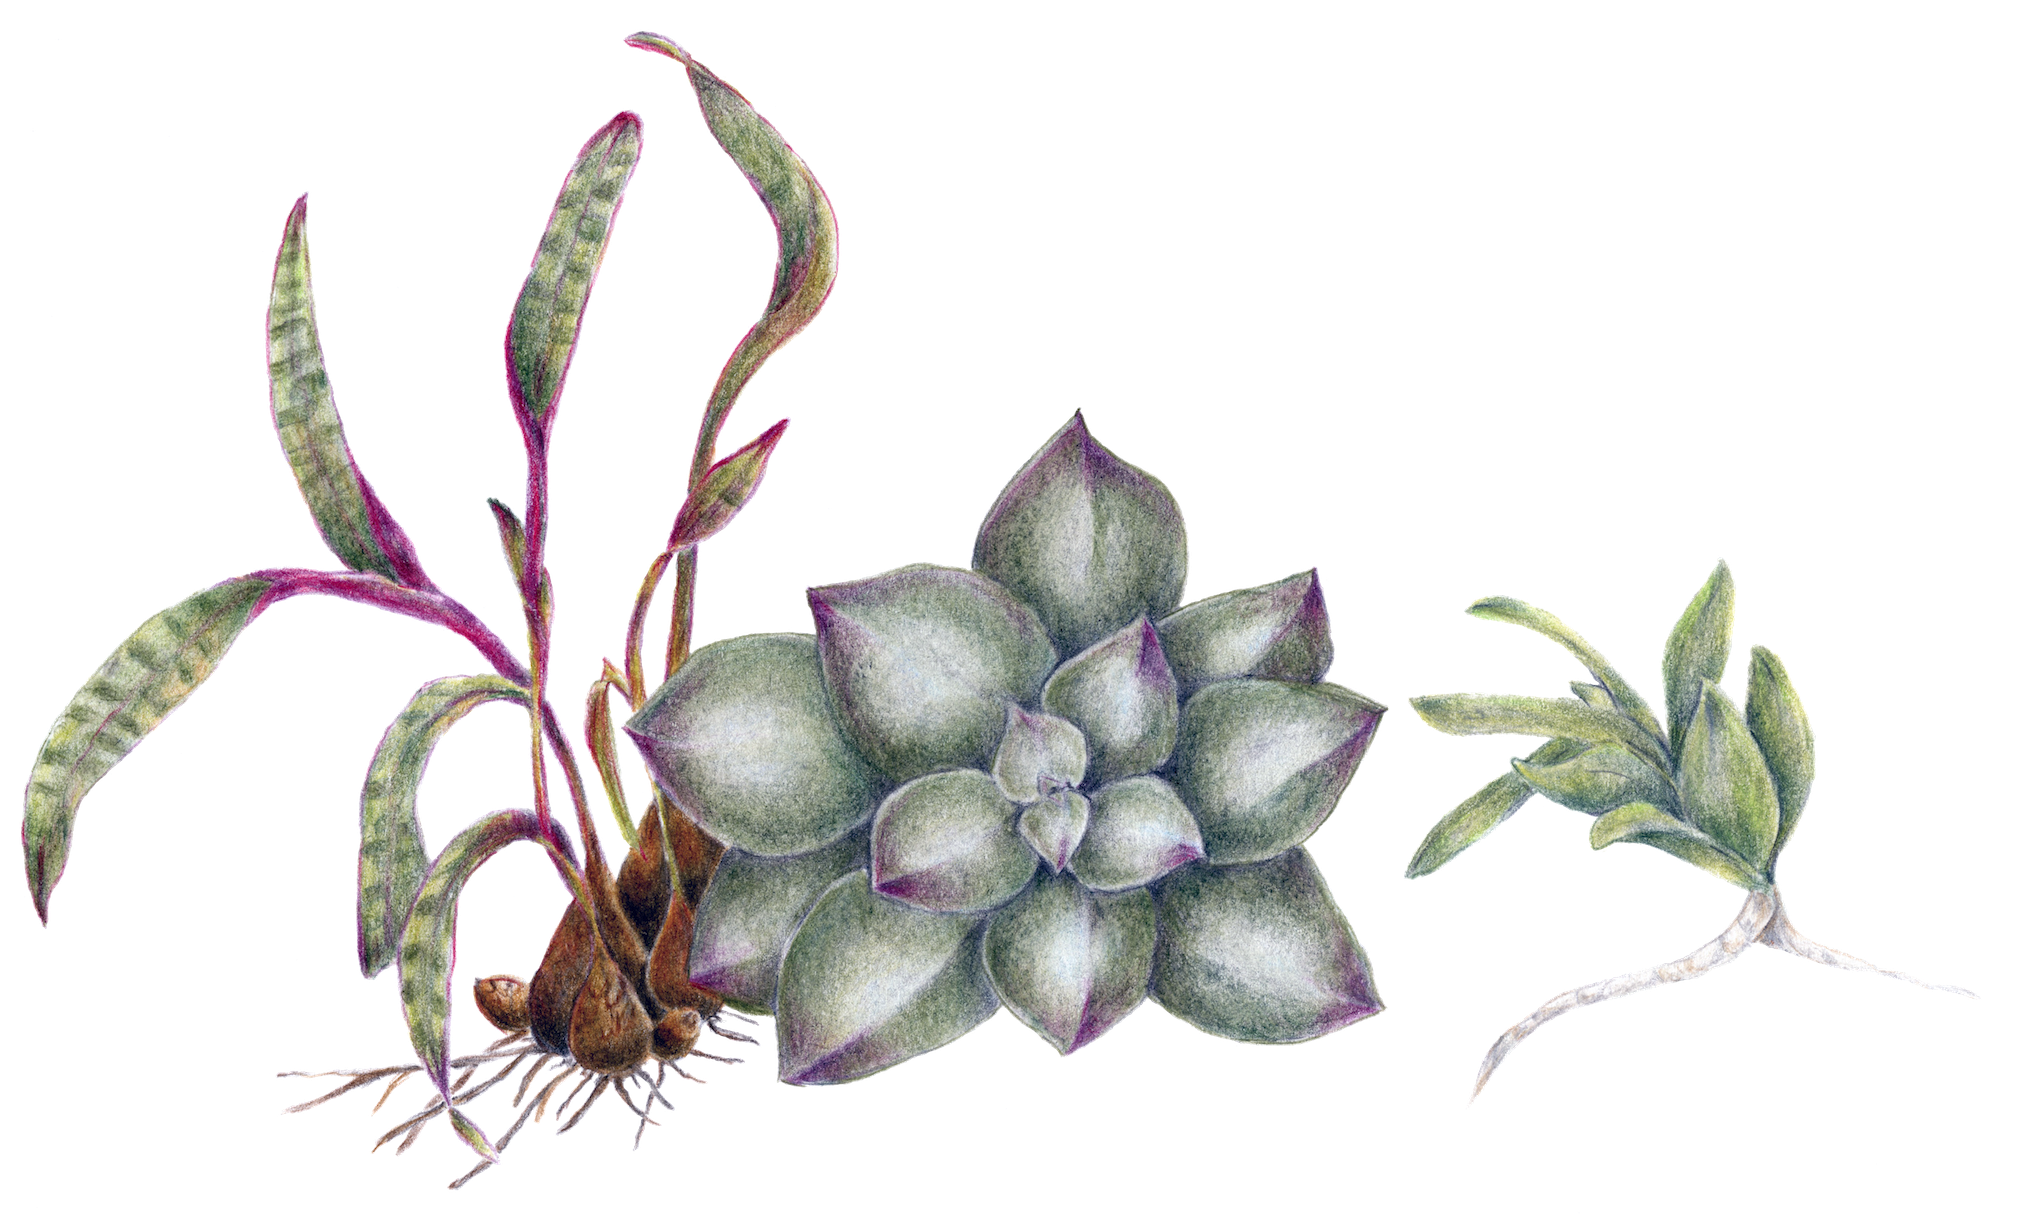 Image of succulents as botanical illustration by Tanya Scharaschkin in her Artist Profile with Art Trails Tasmania